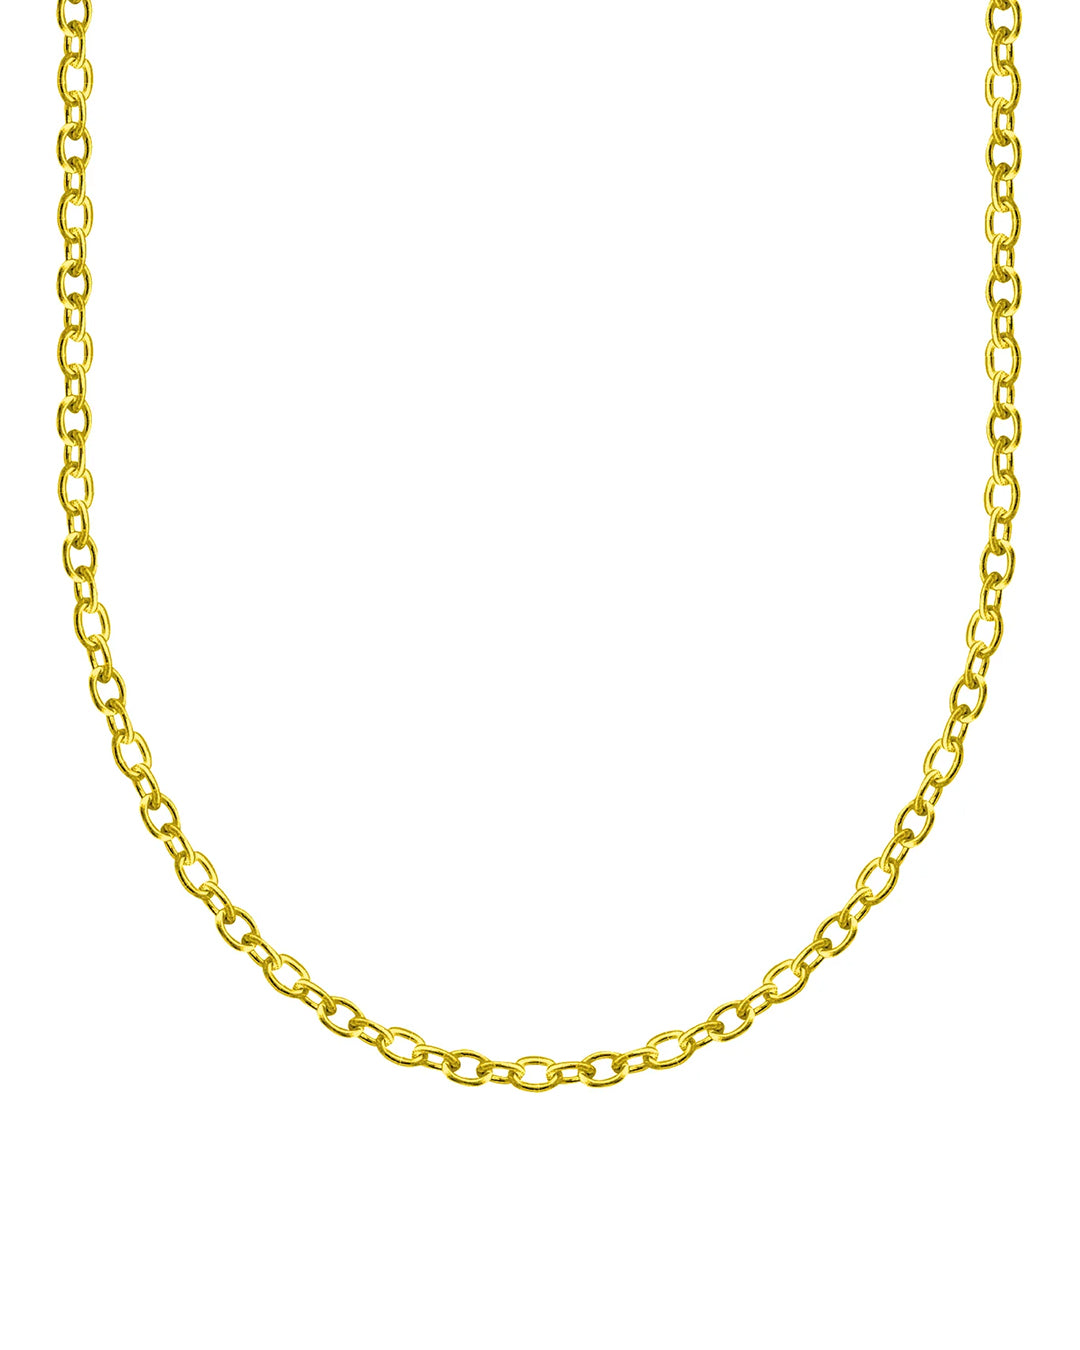 Oval Chain 3mm (Gold)